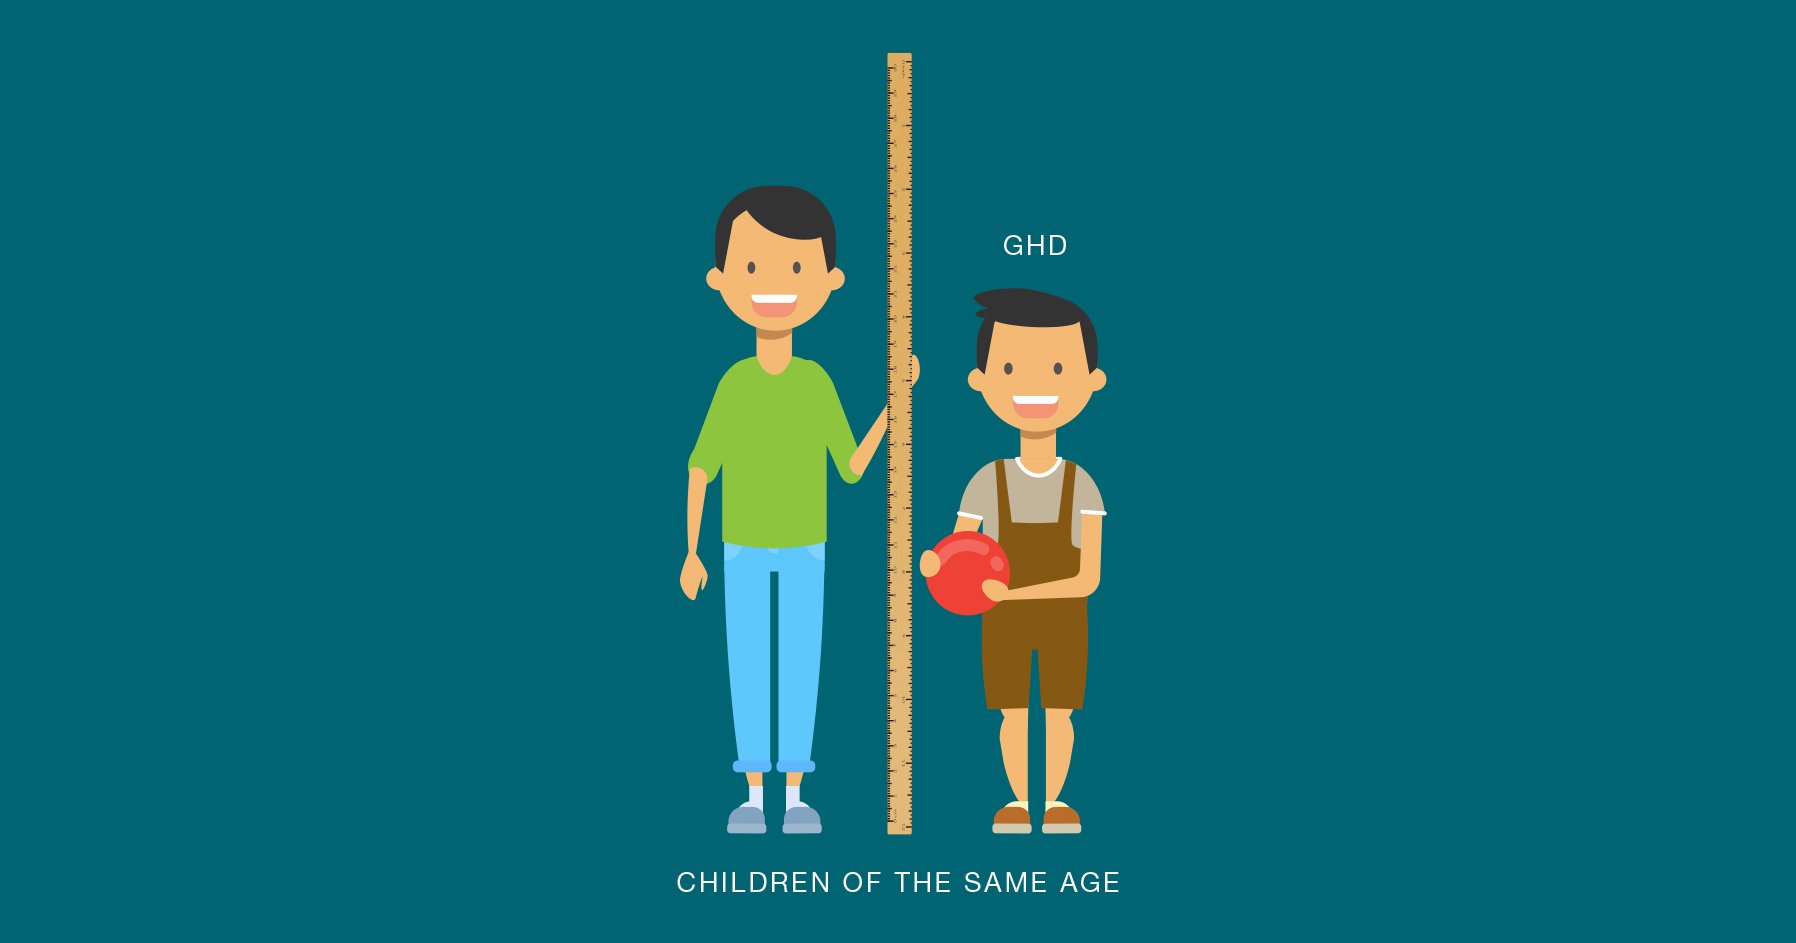 Image of two children demonstrating a growth hormone deficiency. 